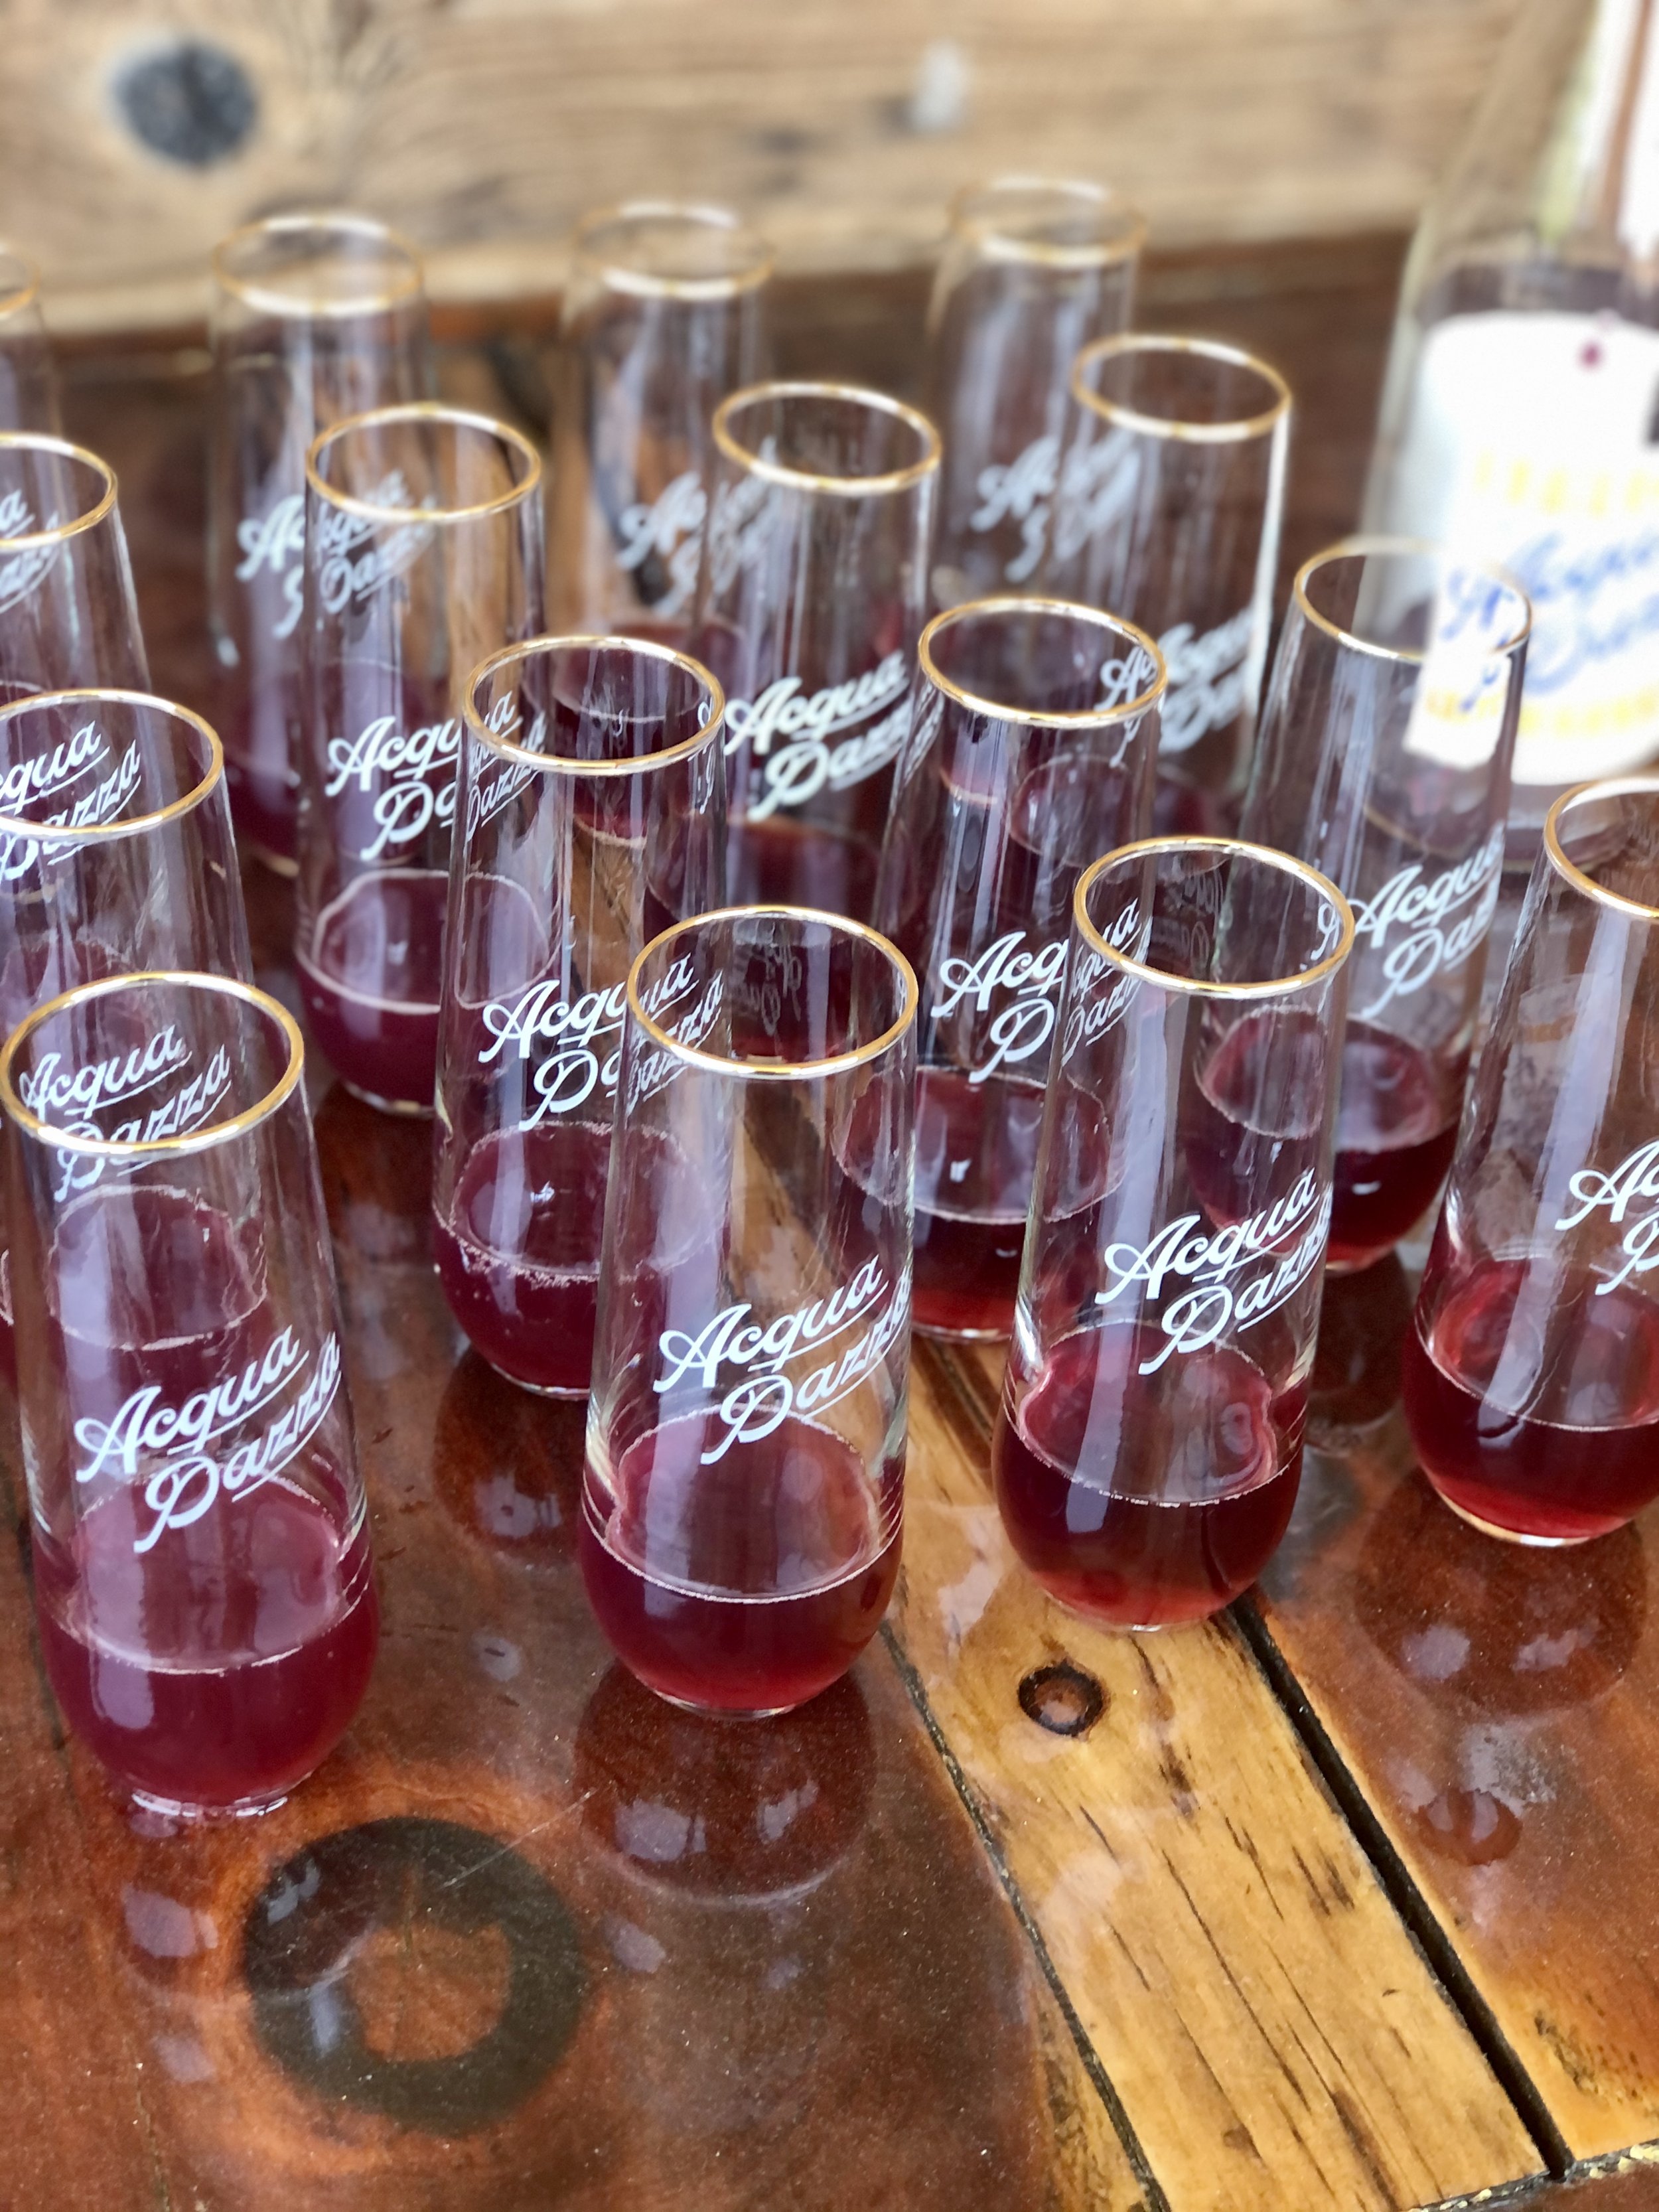 Labeled glasses filled with Acqua Pazza